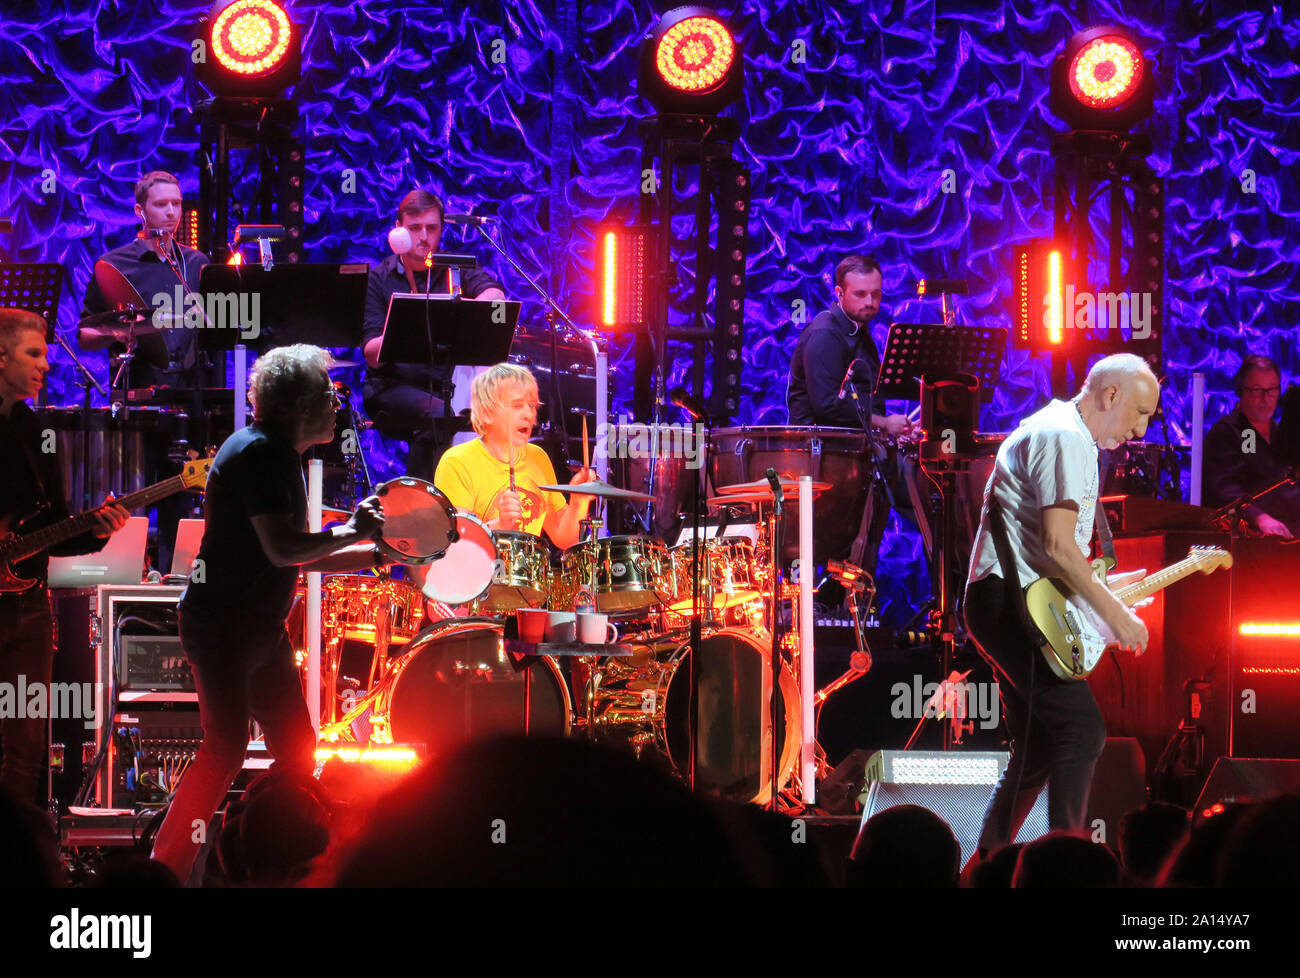 Tampa, United States. 22nd Sep, 2019. September 22, 2019 - Tampa, Florida, United States - Roger Daltrey (second left with tambourine), Zak Starkey (on drums) and Pete Townshend (right on guitar) of the English rock band The Who perform with members of a 48-piece orchestra at the Amalie Arena on the second leg of their Moving On! tour on September 22, 2019 in Tampa, Florida. Credit: Paul Hennessy/Alamy Live News Stock Photo